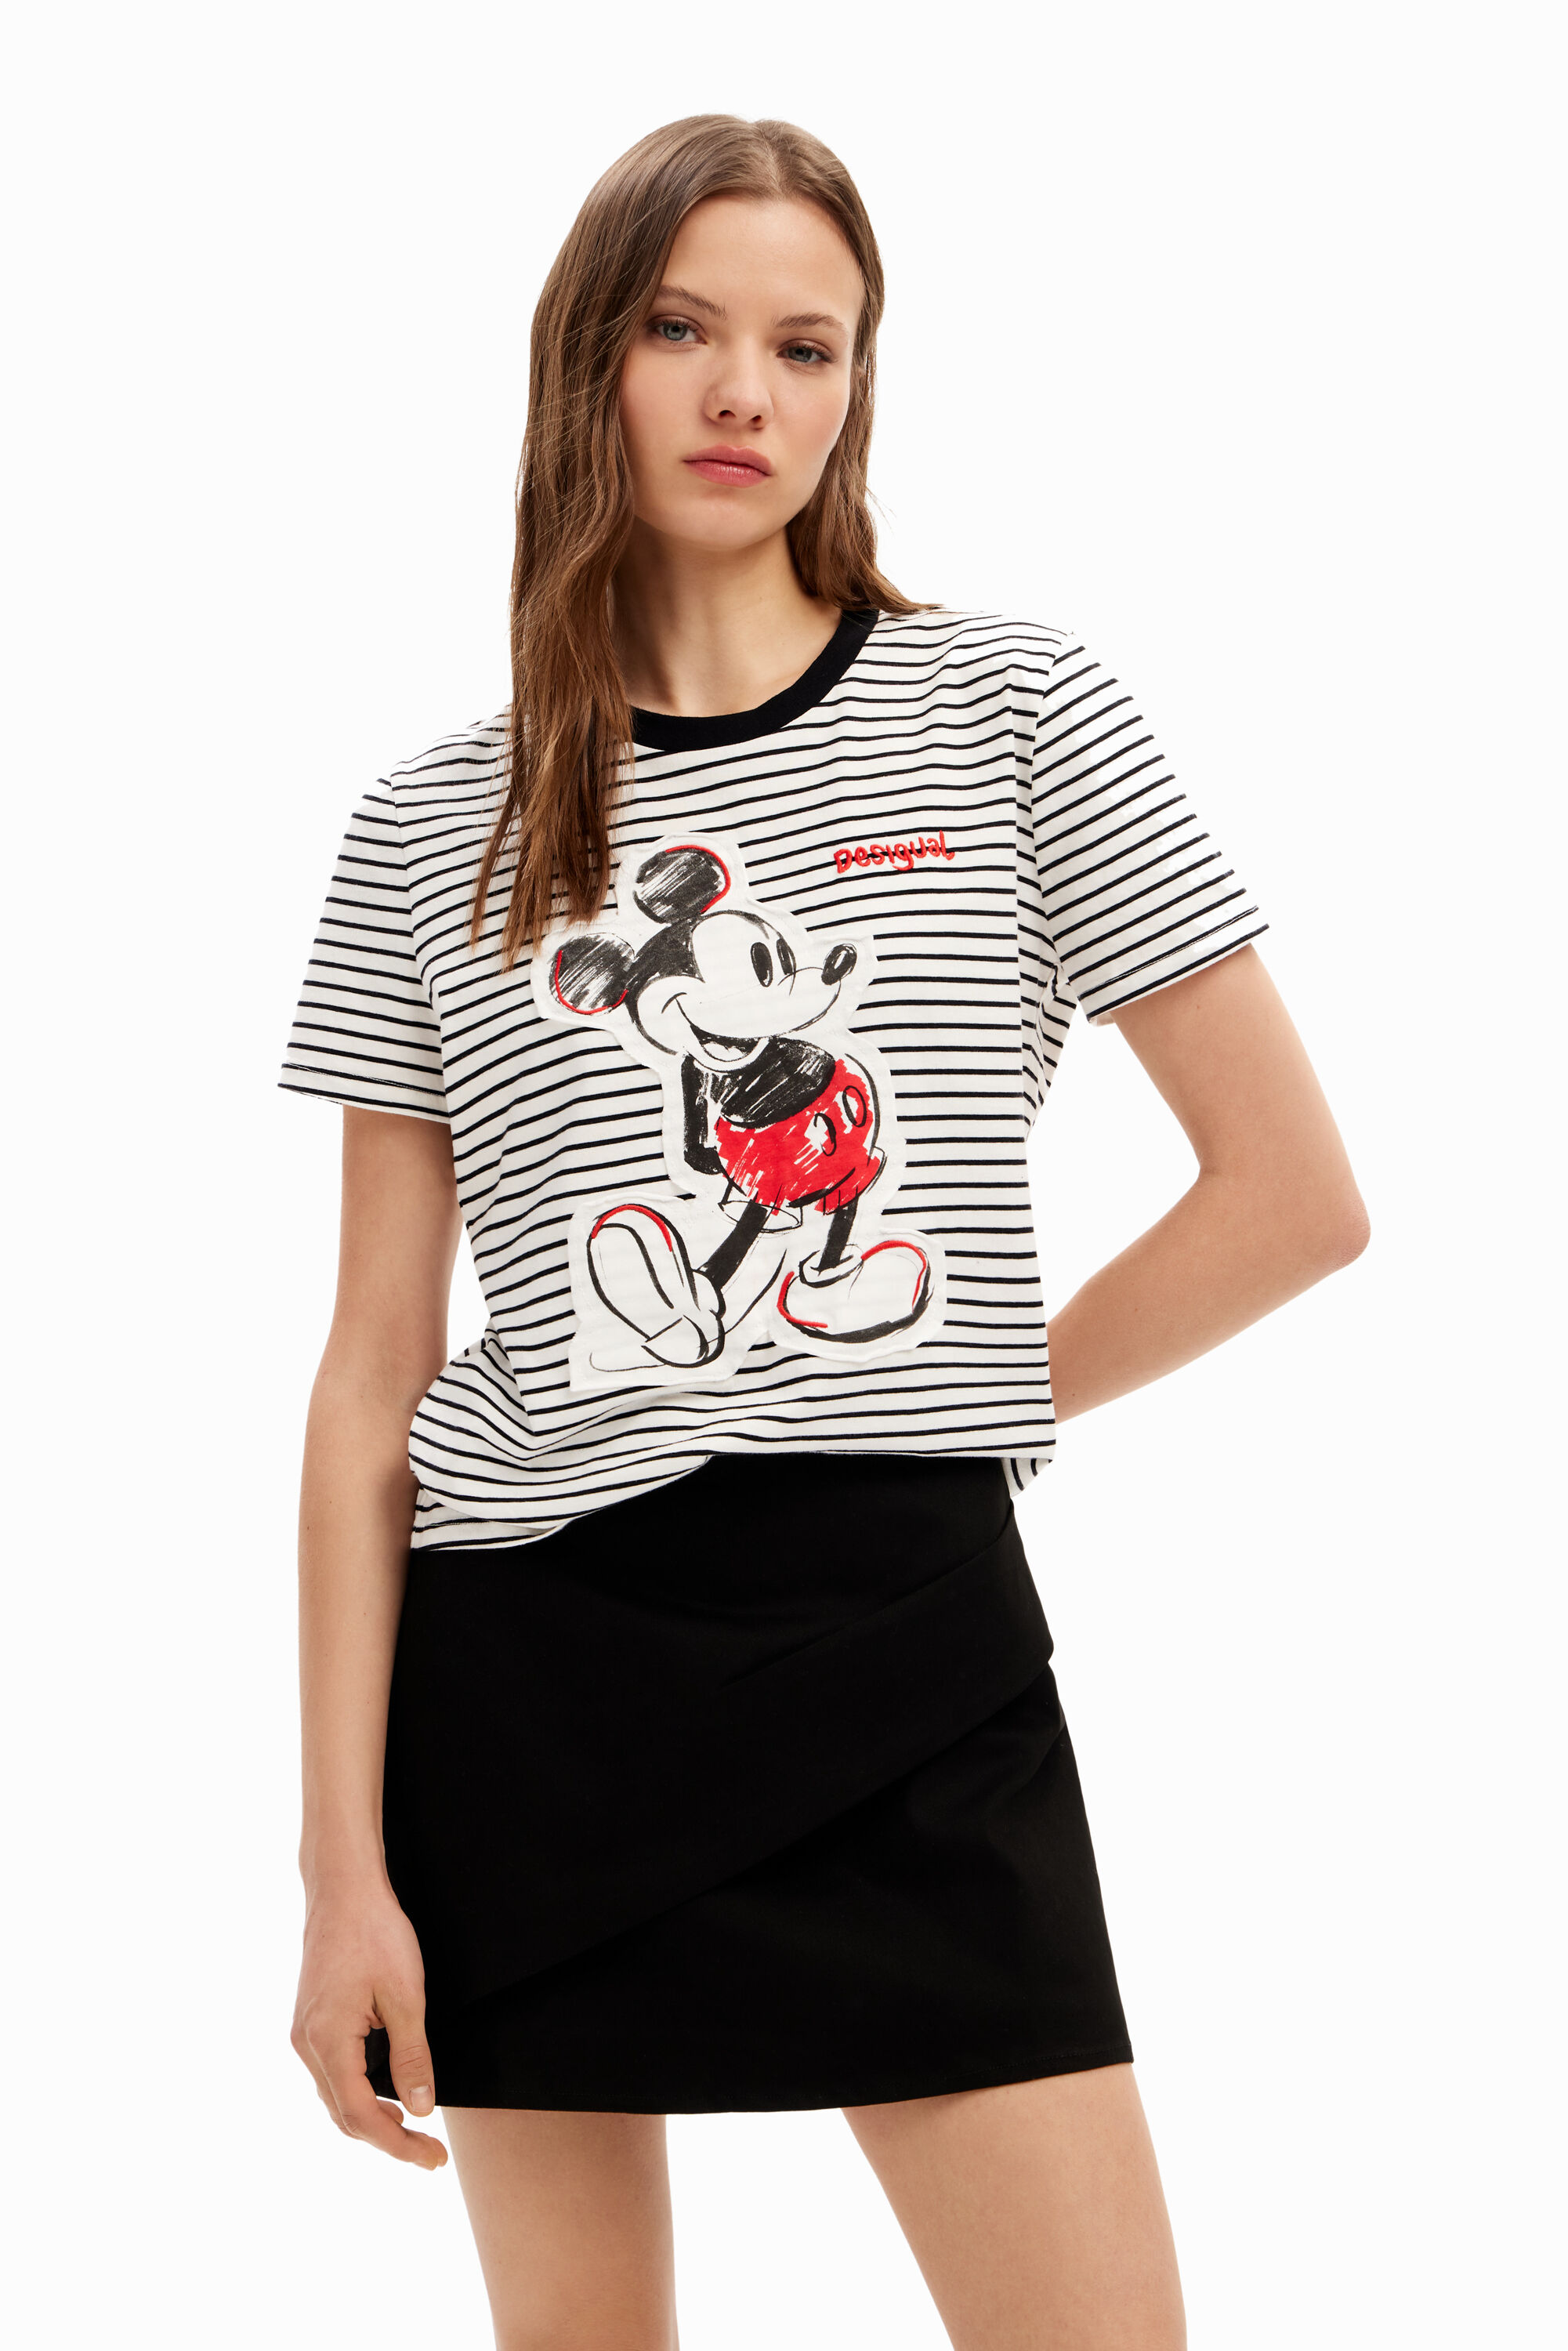 Striped Mickey Mouse T-shirt - WHITE - S